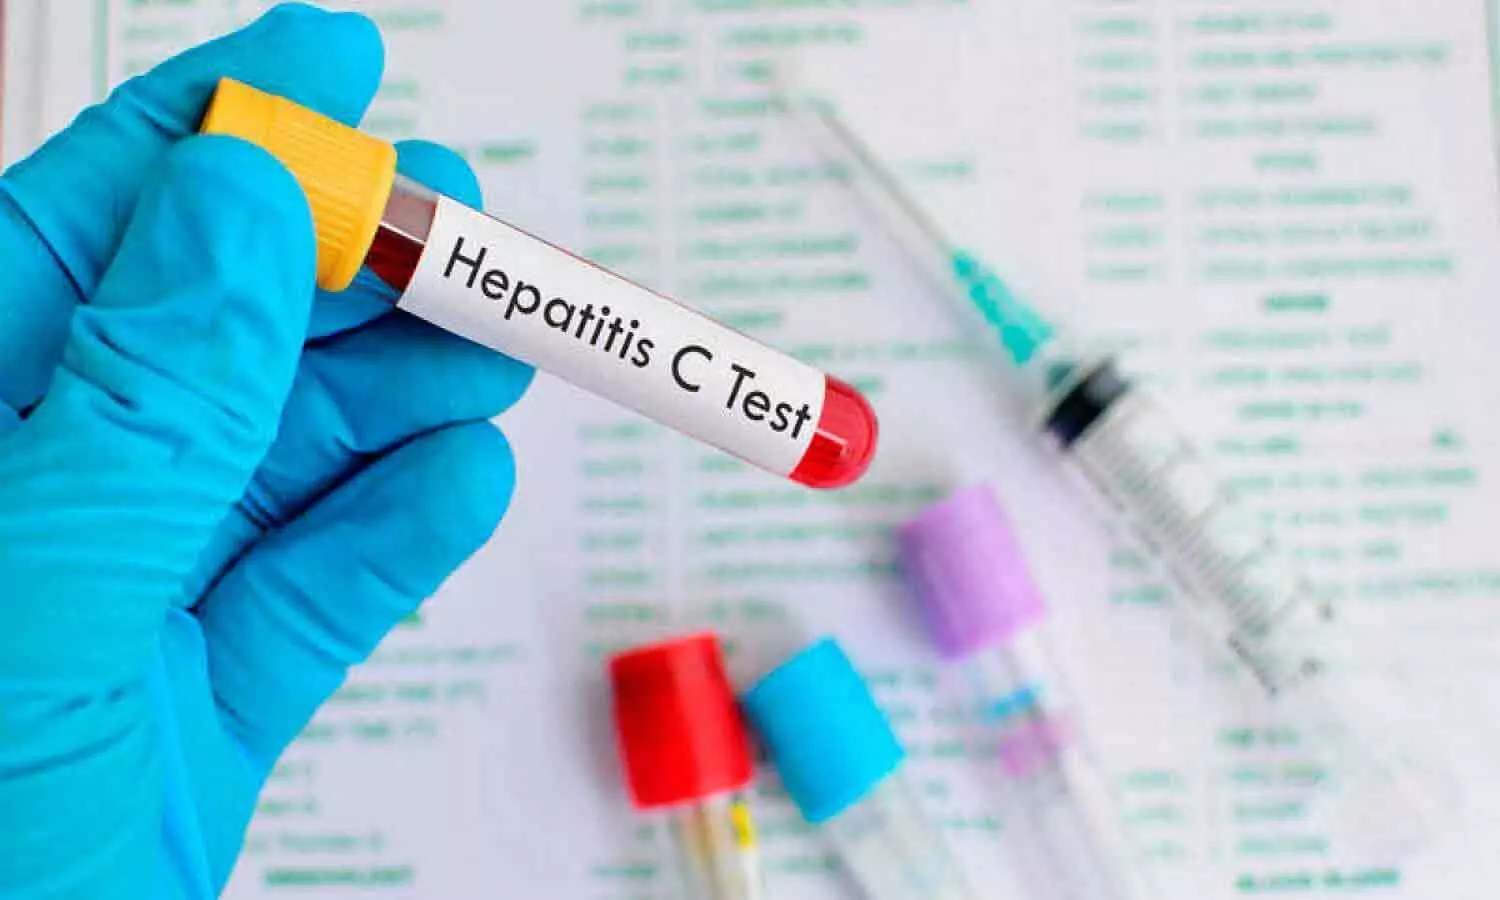 Treatment of Chronic Hepatitis C in Young Children Reduces Adverse Outcomes: Study